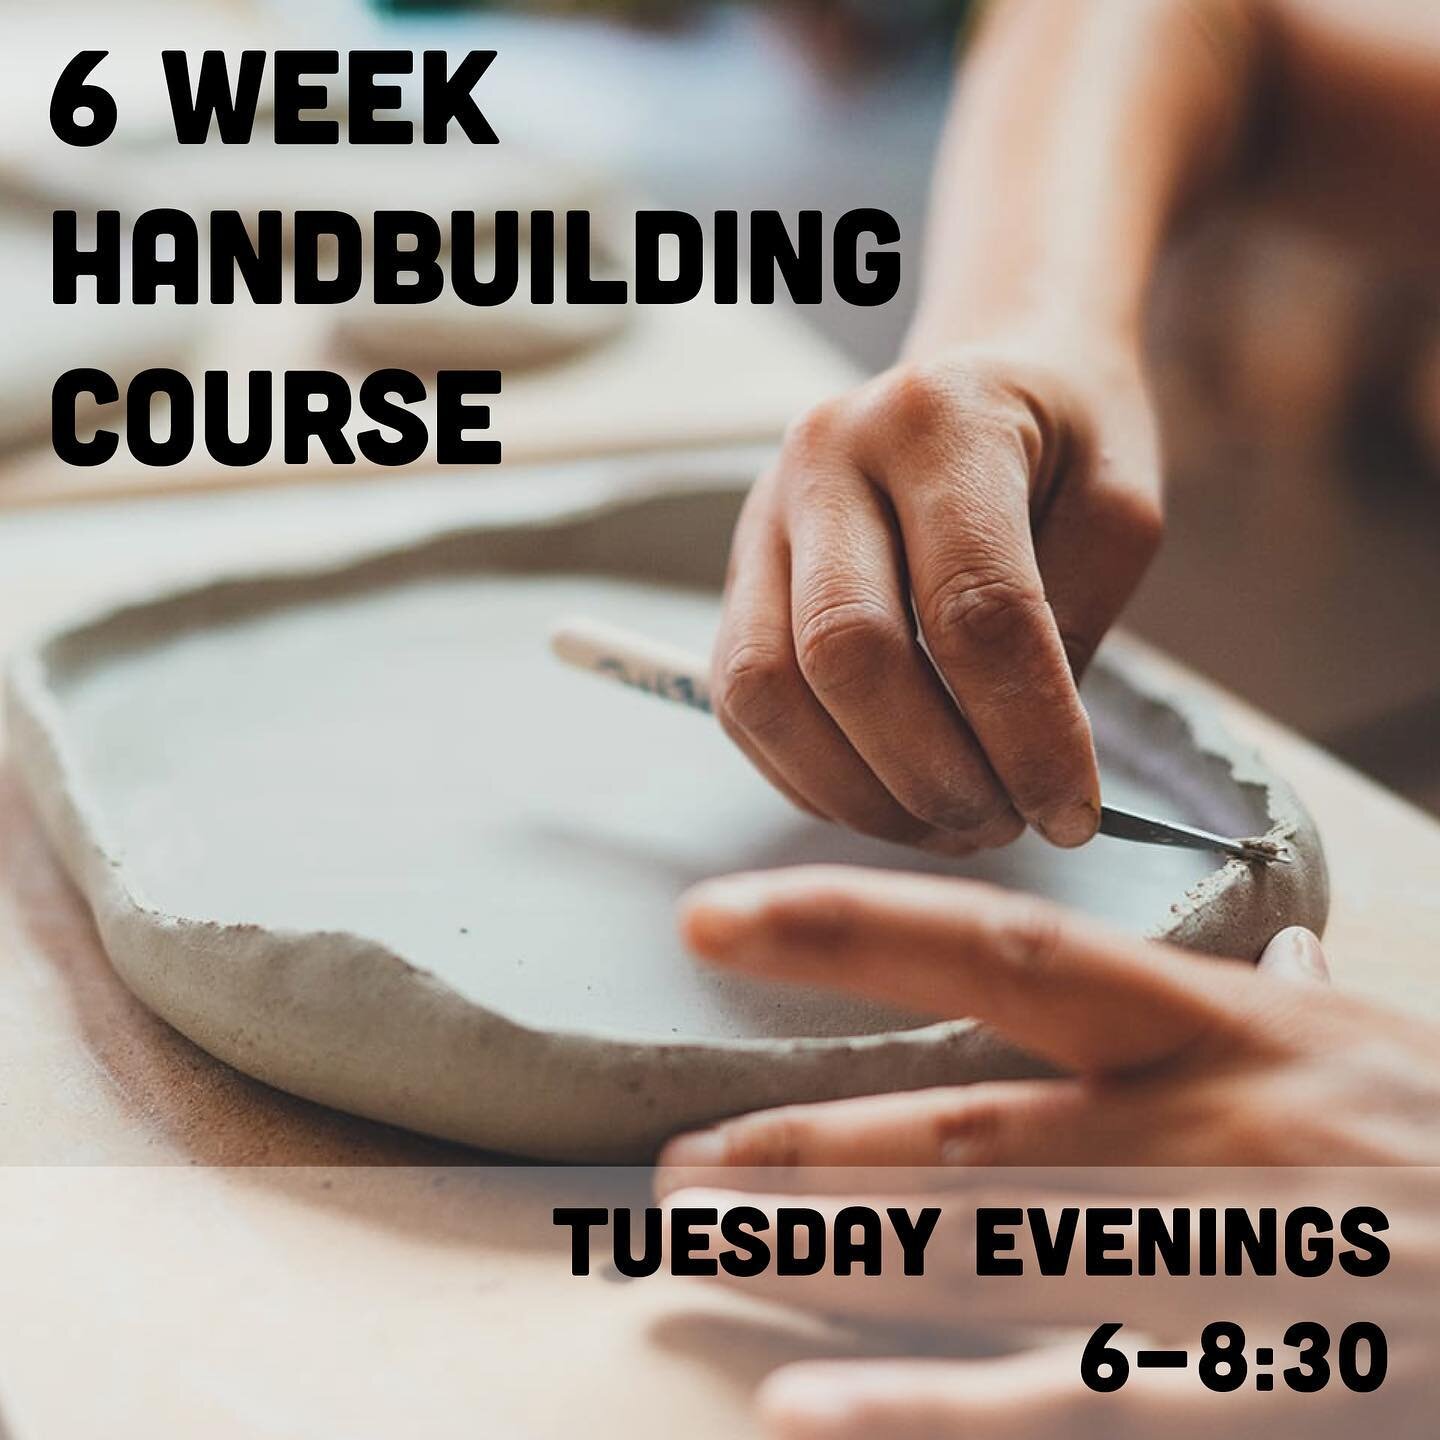 Pinch! Coil! Slab! Join! Learn all of these techniques &amp; more in our 6 week handbuilding class. Class starts tomorrow, join @laneeechapman for a fun adventure and get creative!

#missoula #montana #clay #ceramics #handbuilding #keeplearning #pott